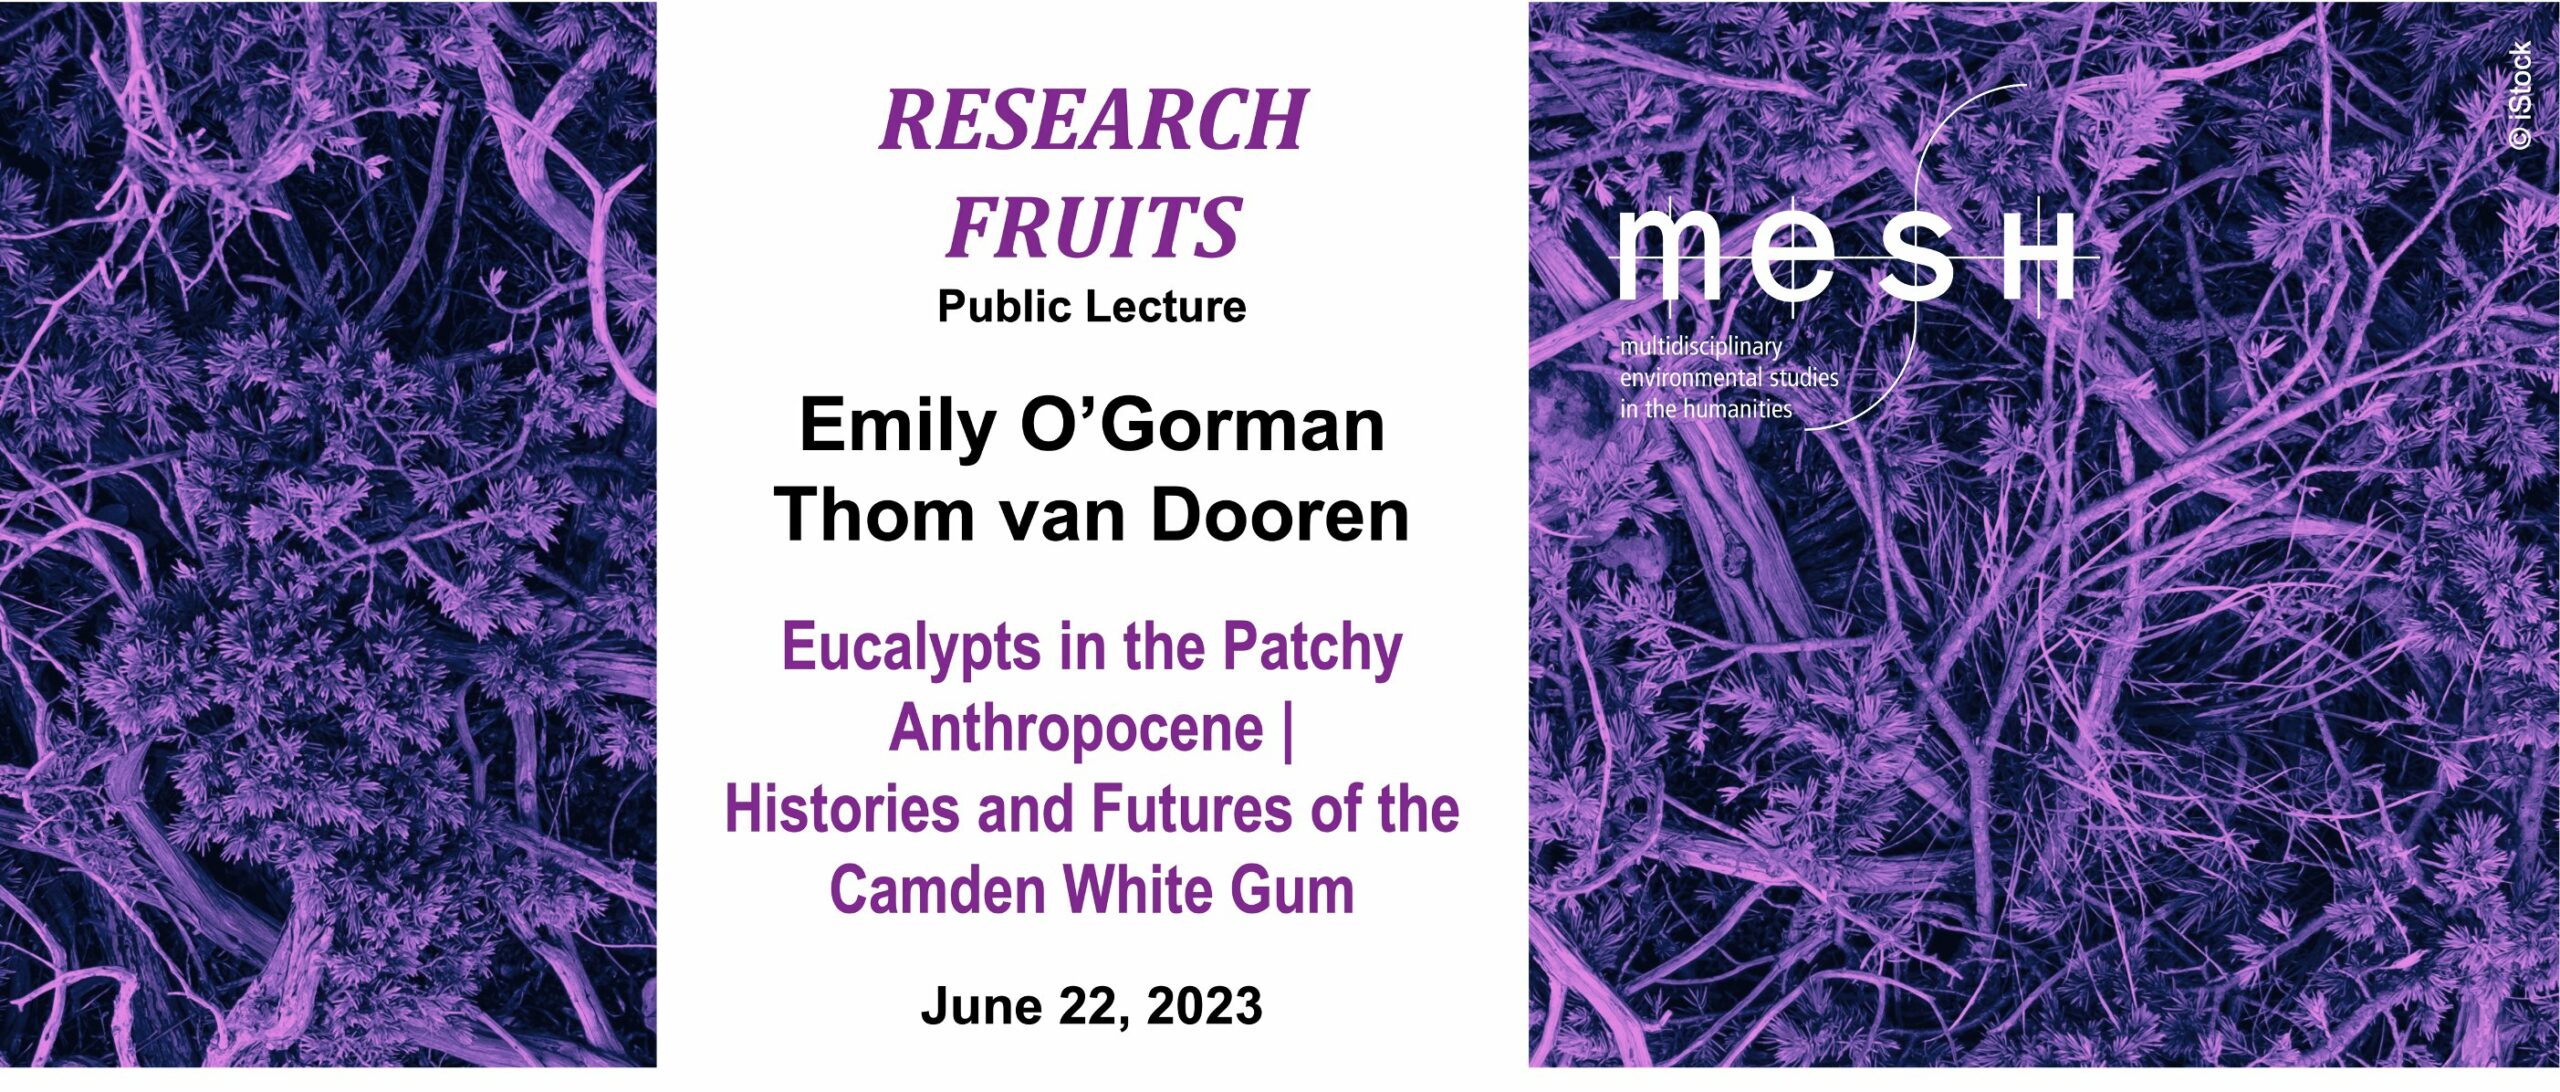 MESH Research Fruits - Public Lecture: Eucalypts in the Patchy Anthropocene | Histories and Futures of the Camden White Gum